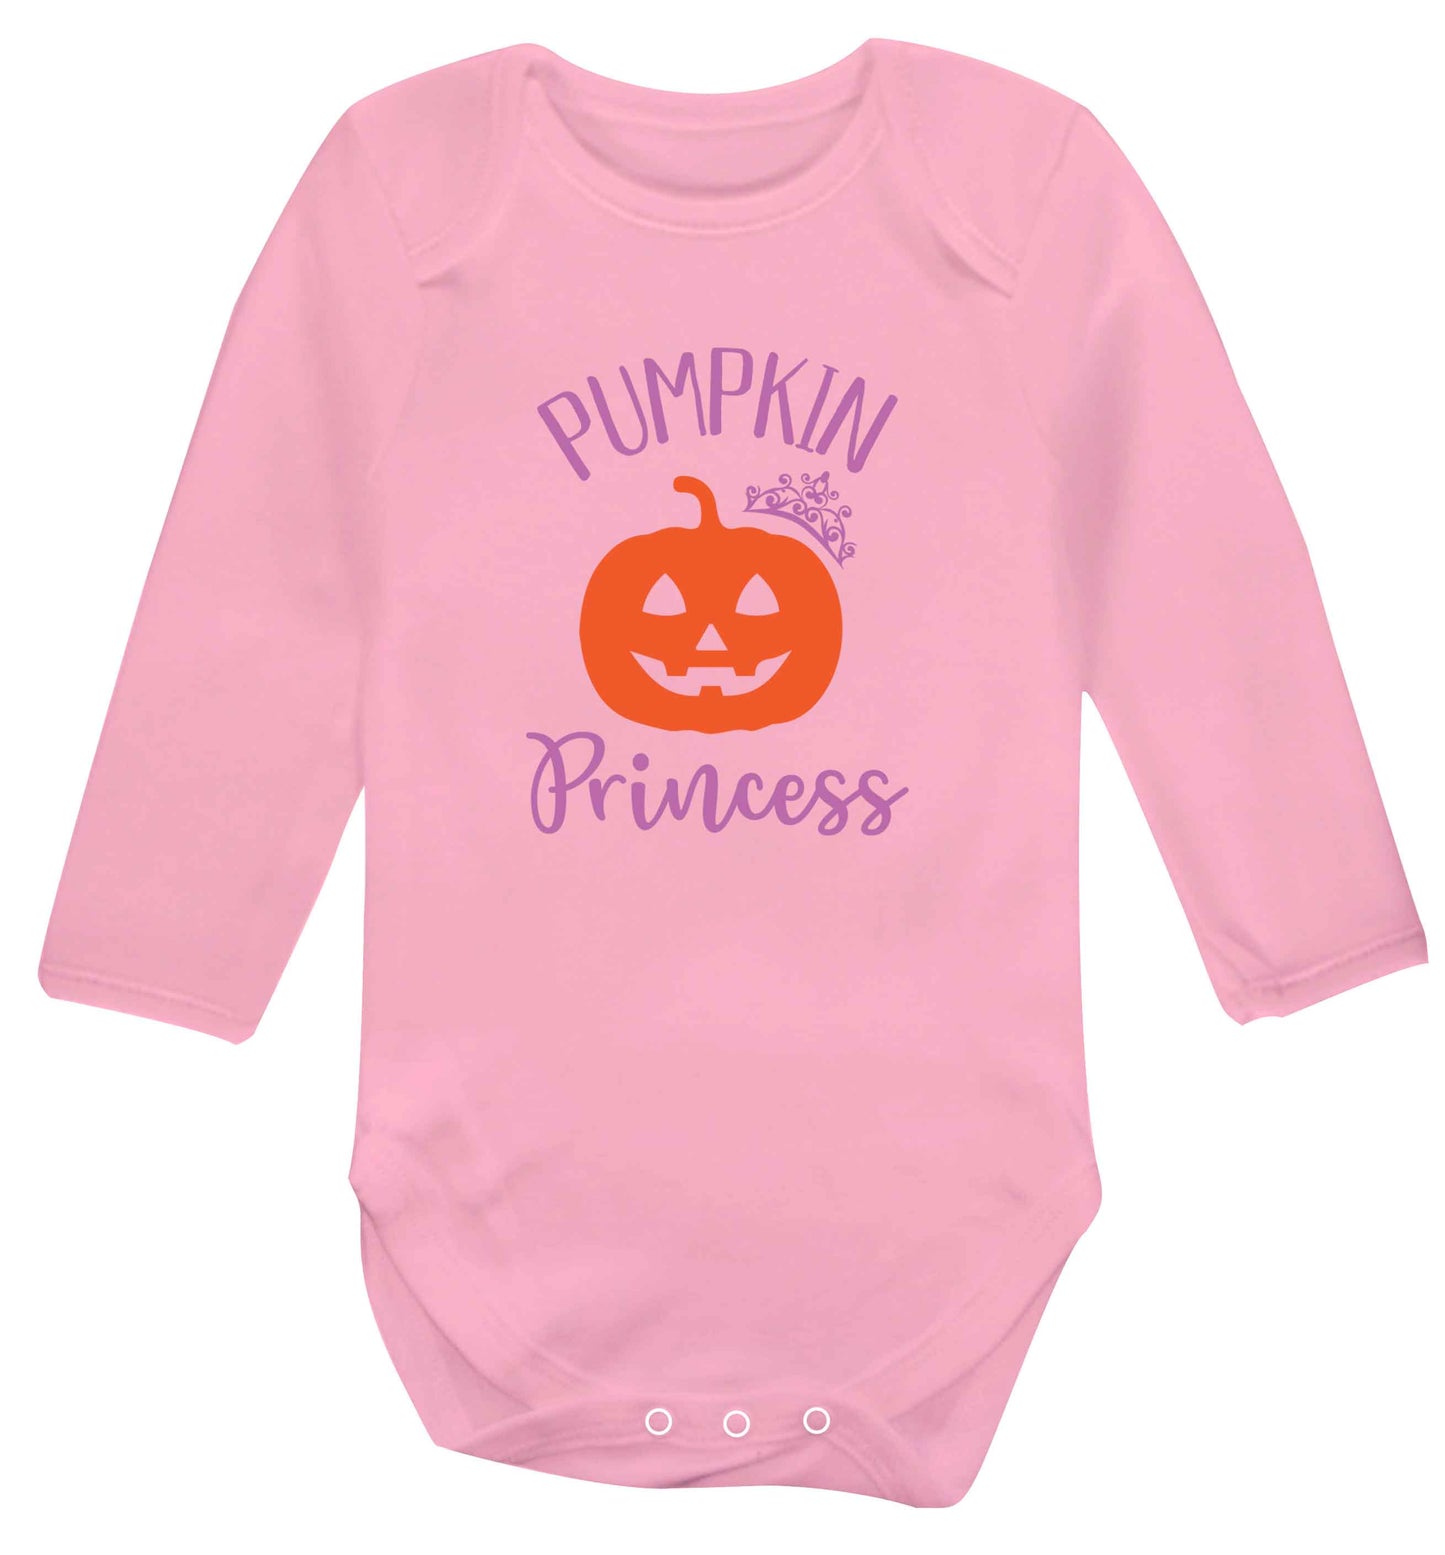 Happiness Pumpkin Spice baby vest long sleeved pale pink 6-12 months